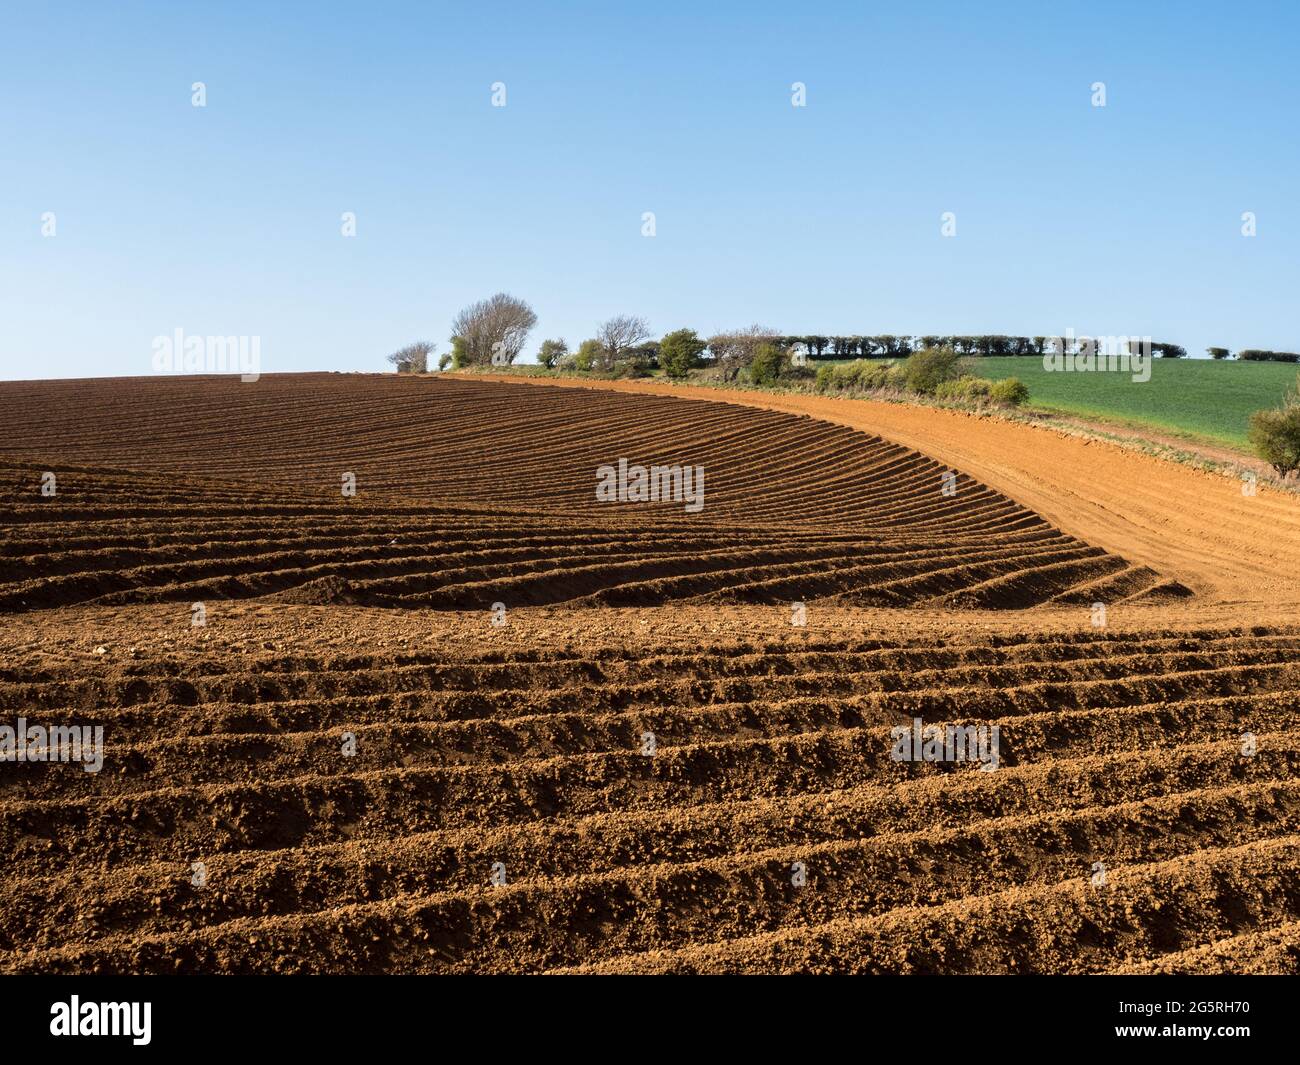 strong geometric repetition shape stripes pattern in curves and lines in a ploughed seeded field at golden hour side hard light under clear blue sky Stock Photo